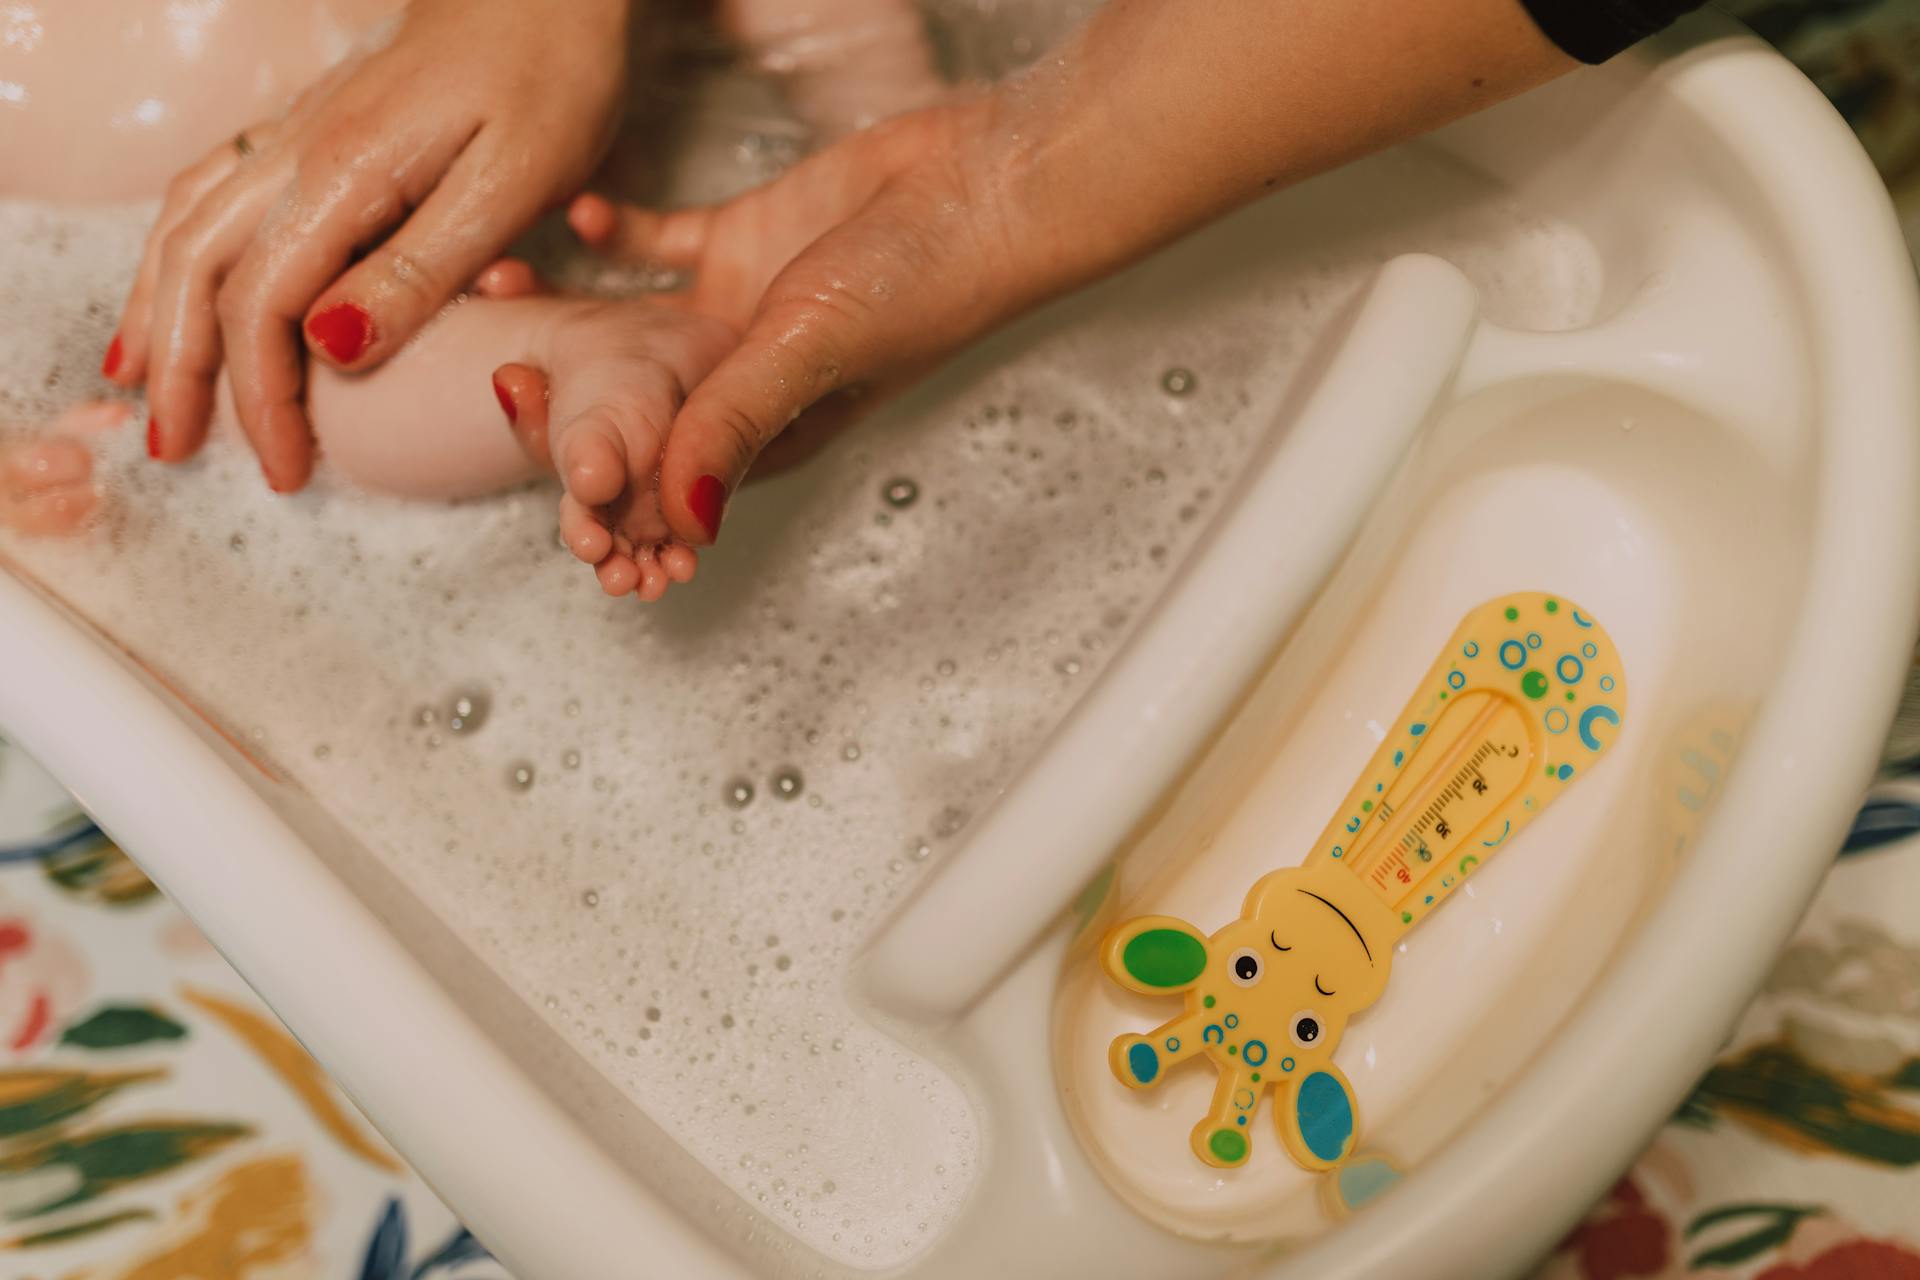 A woman bathing a baby | Source: Pexels